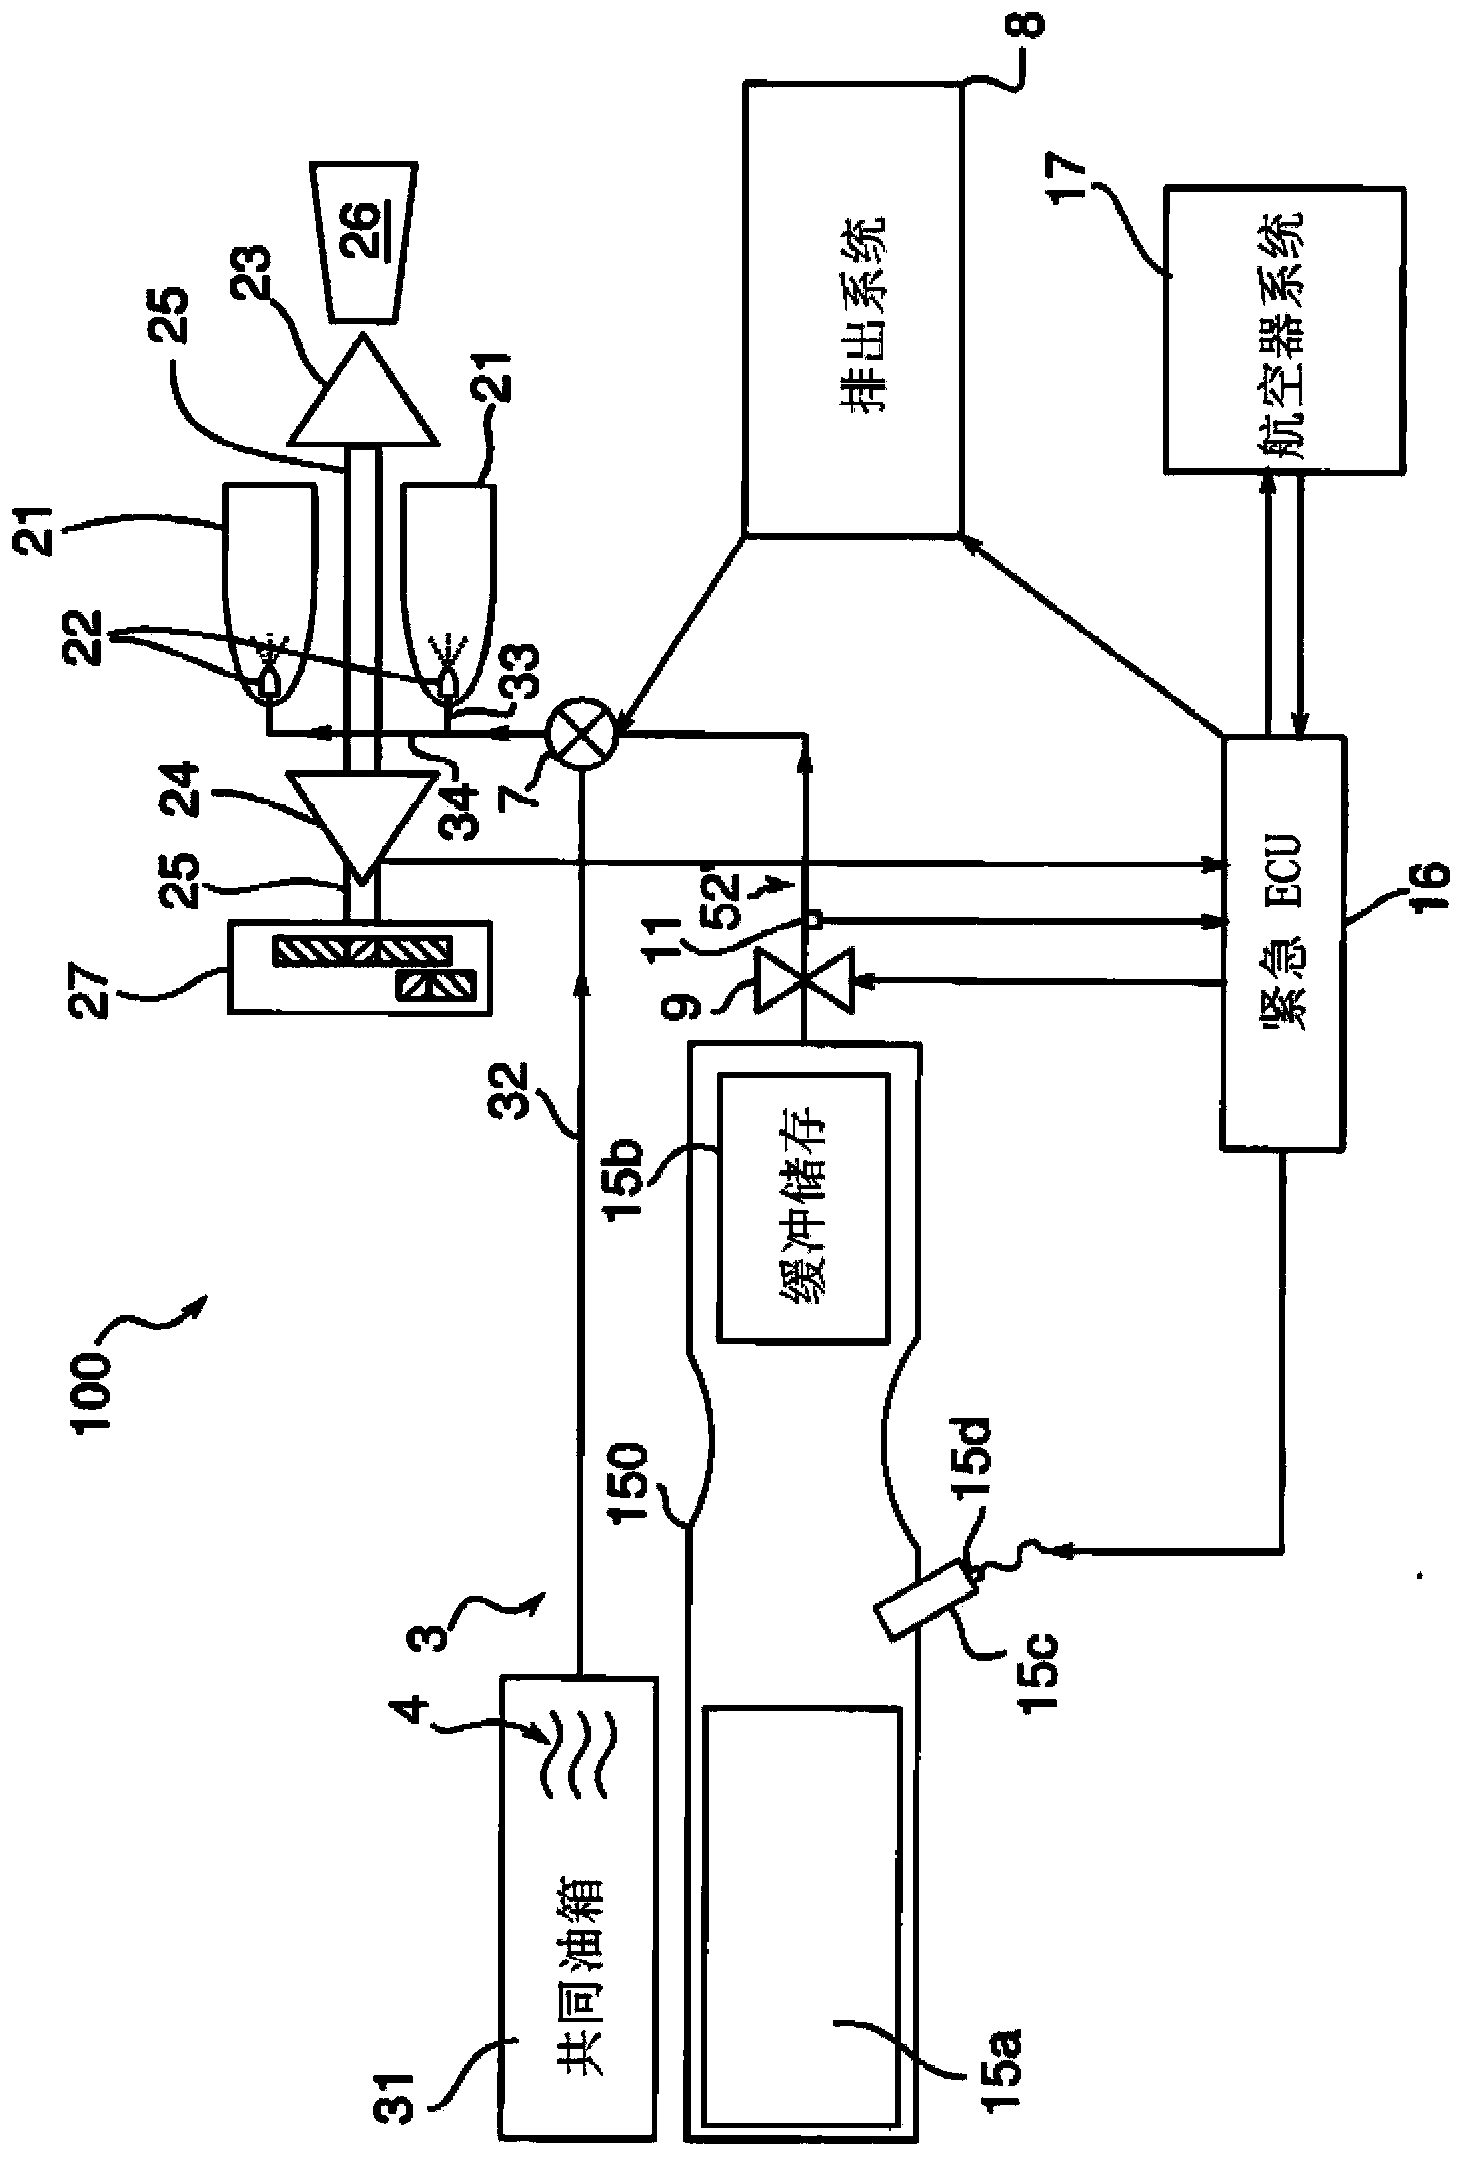 Auxiliary power supply process by an auxiliary power group and corresponding architecture